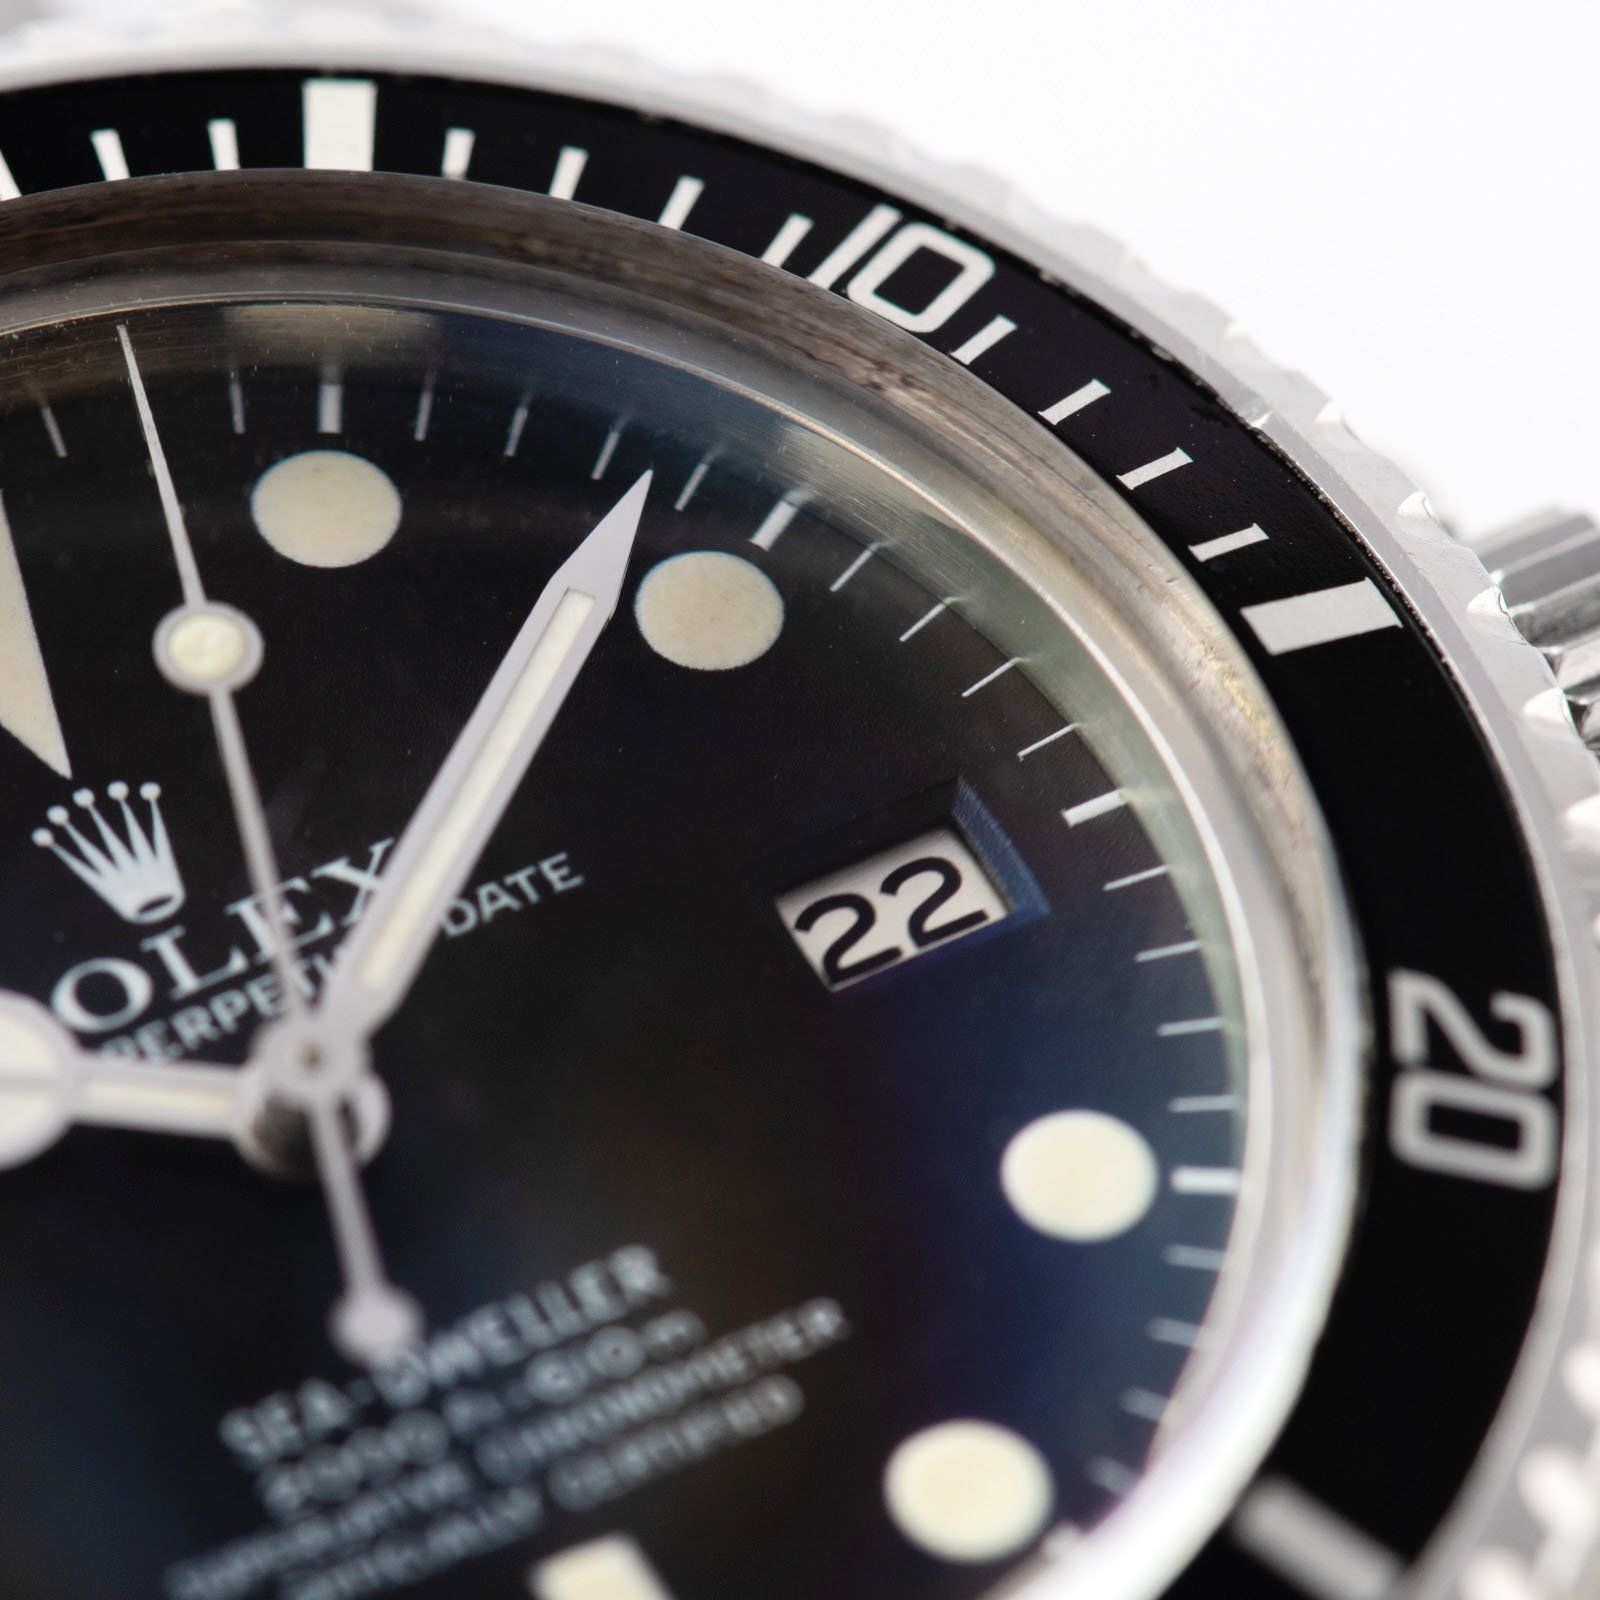 Rolex Seadweller Great White Reference 1665